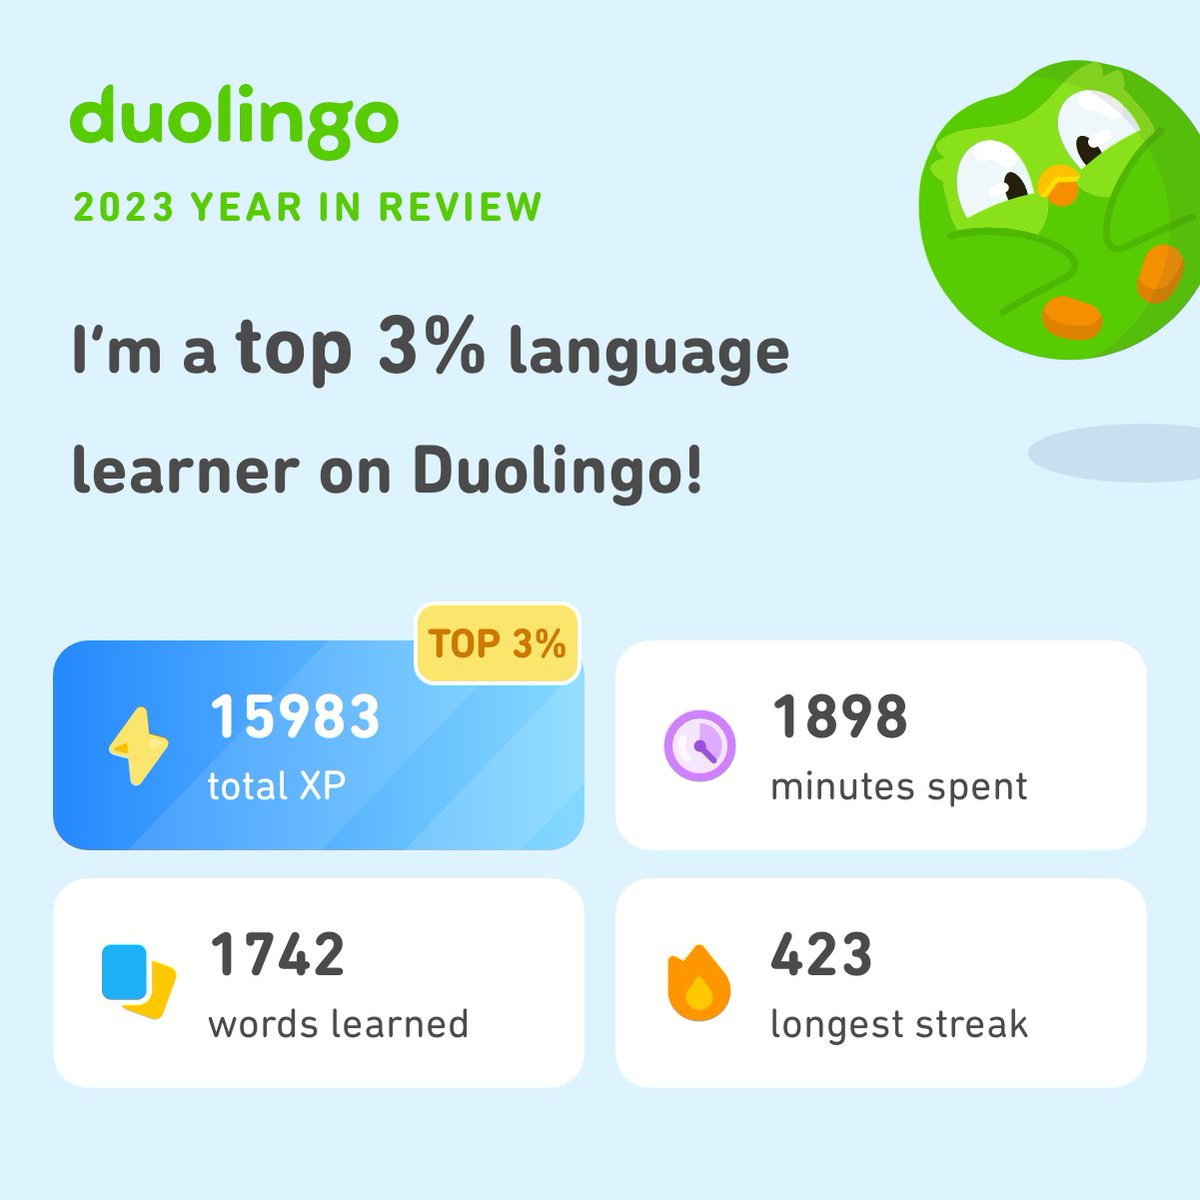 wowwww🥳🥳🥳🥰I’m ready to continue learning with Duo in the new year! 😘 Look how much I learned on Duolingo in 2023! How did you do? #Duolingo365